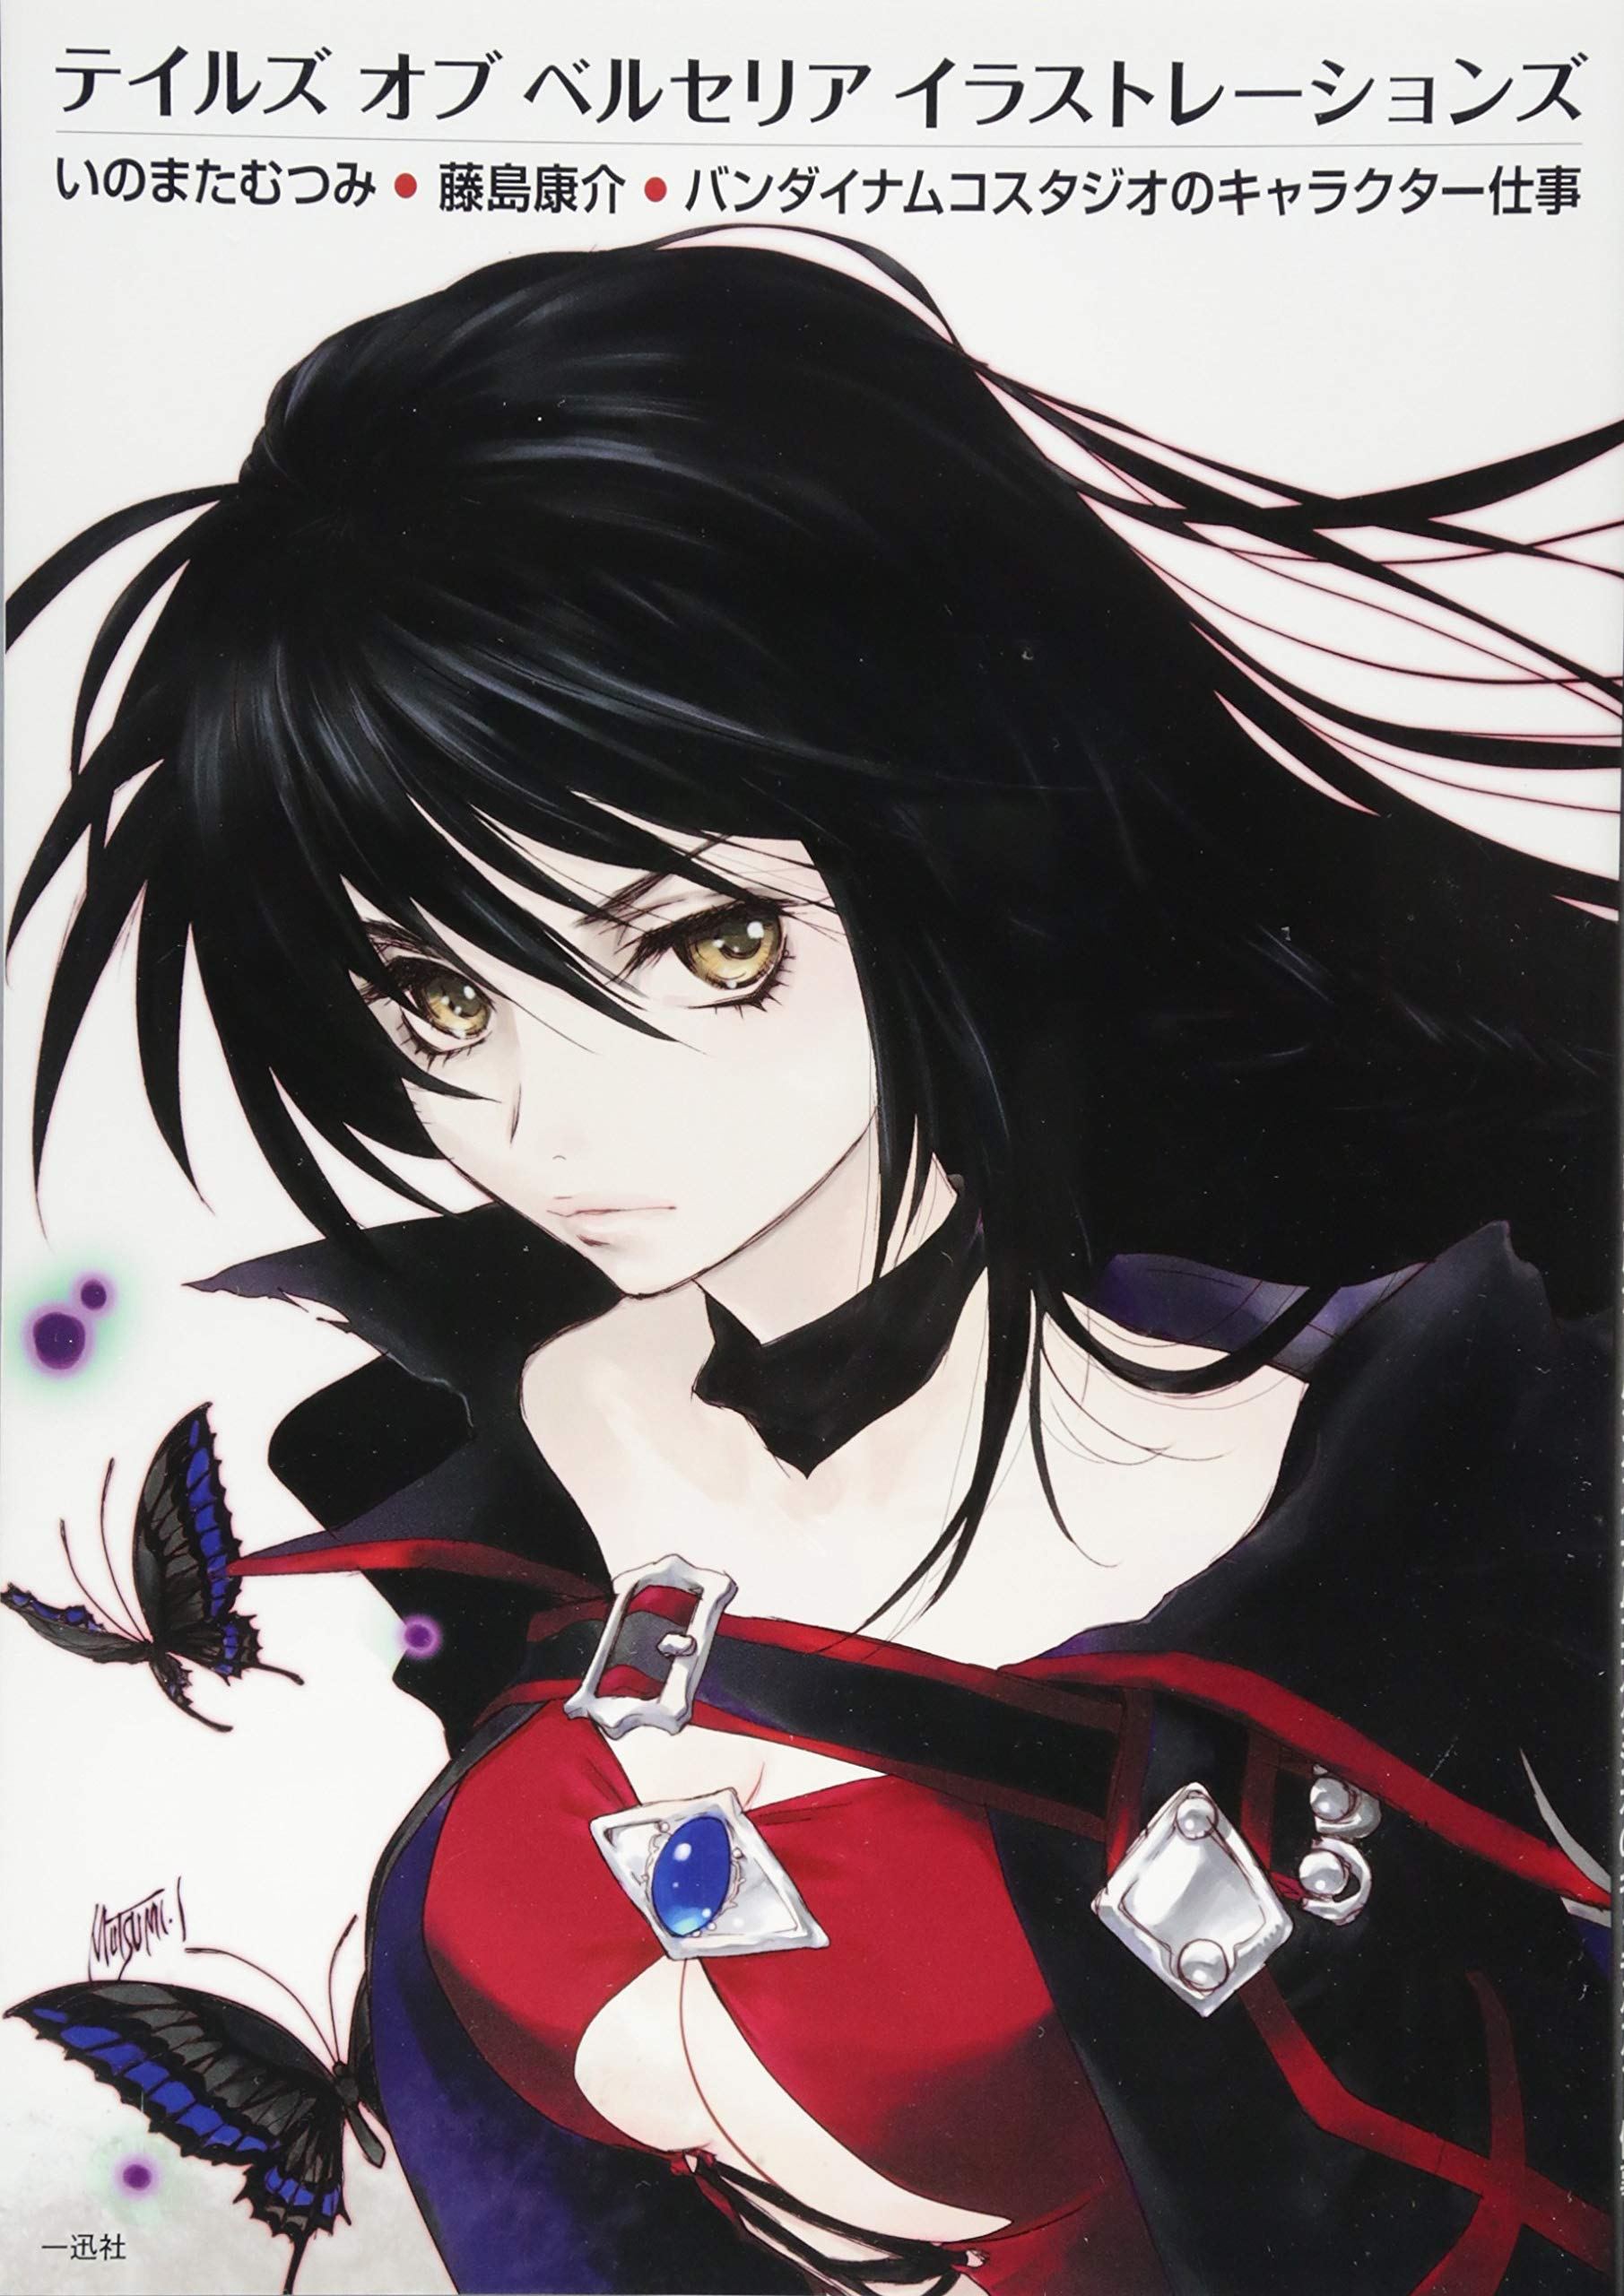 Tales of Berseria Official World Guidance Art Book Japan Game